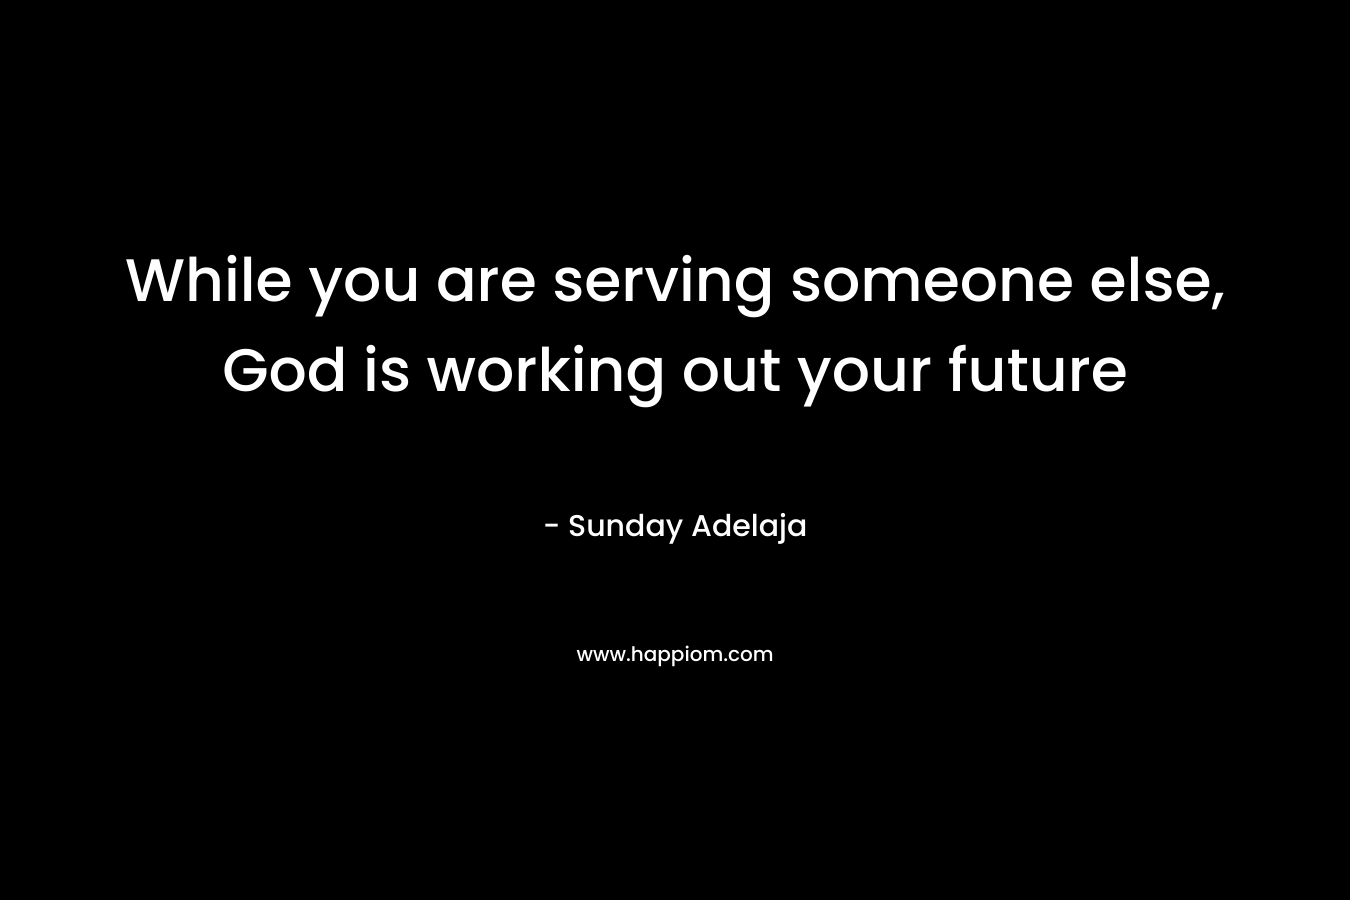 While you are serving someone else, God is working out your future